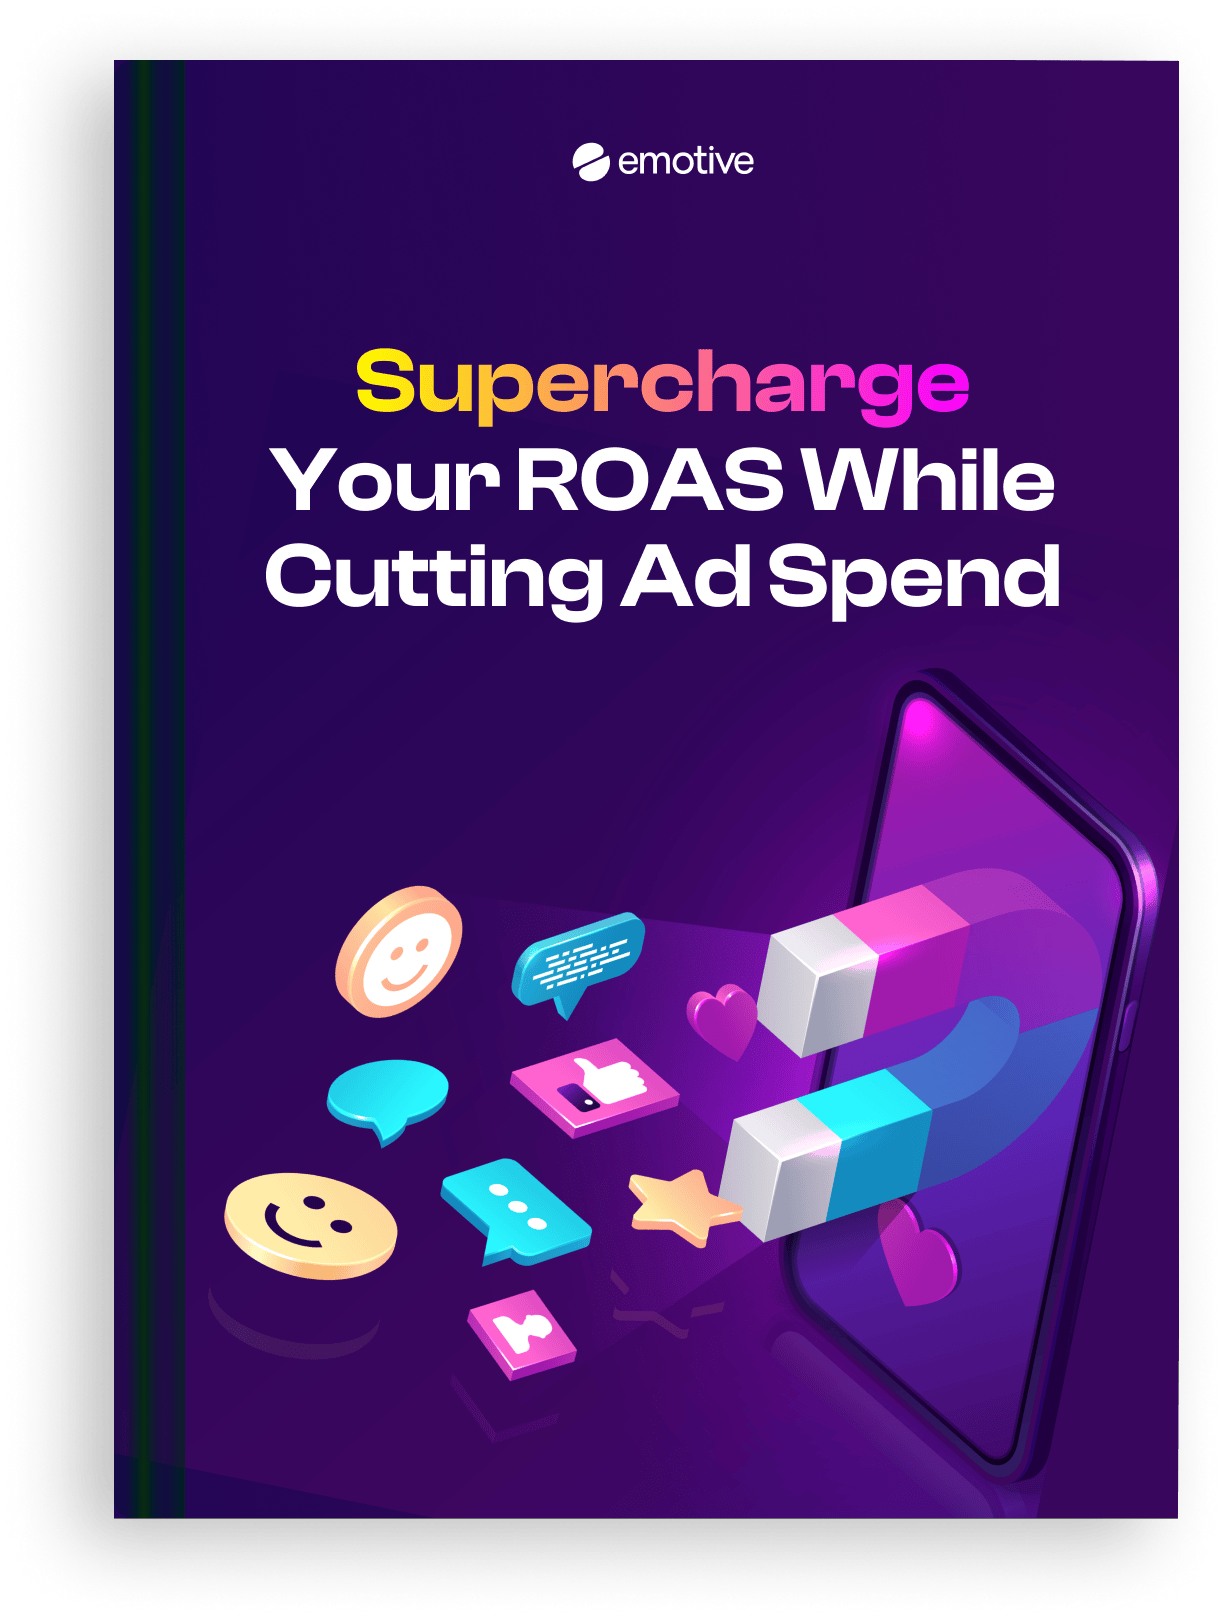 Supercharge Your ROAS While Cutting Ad Spend Featured Image